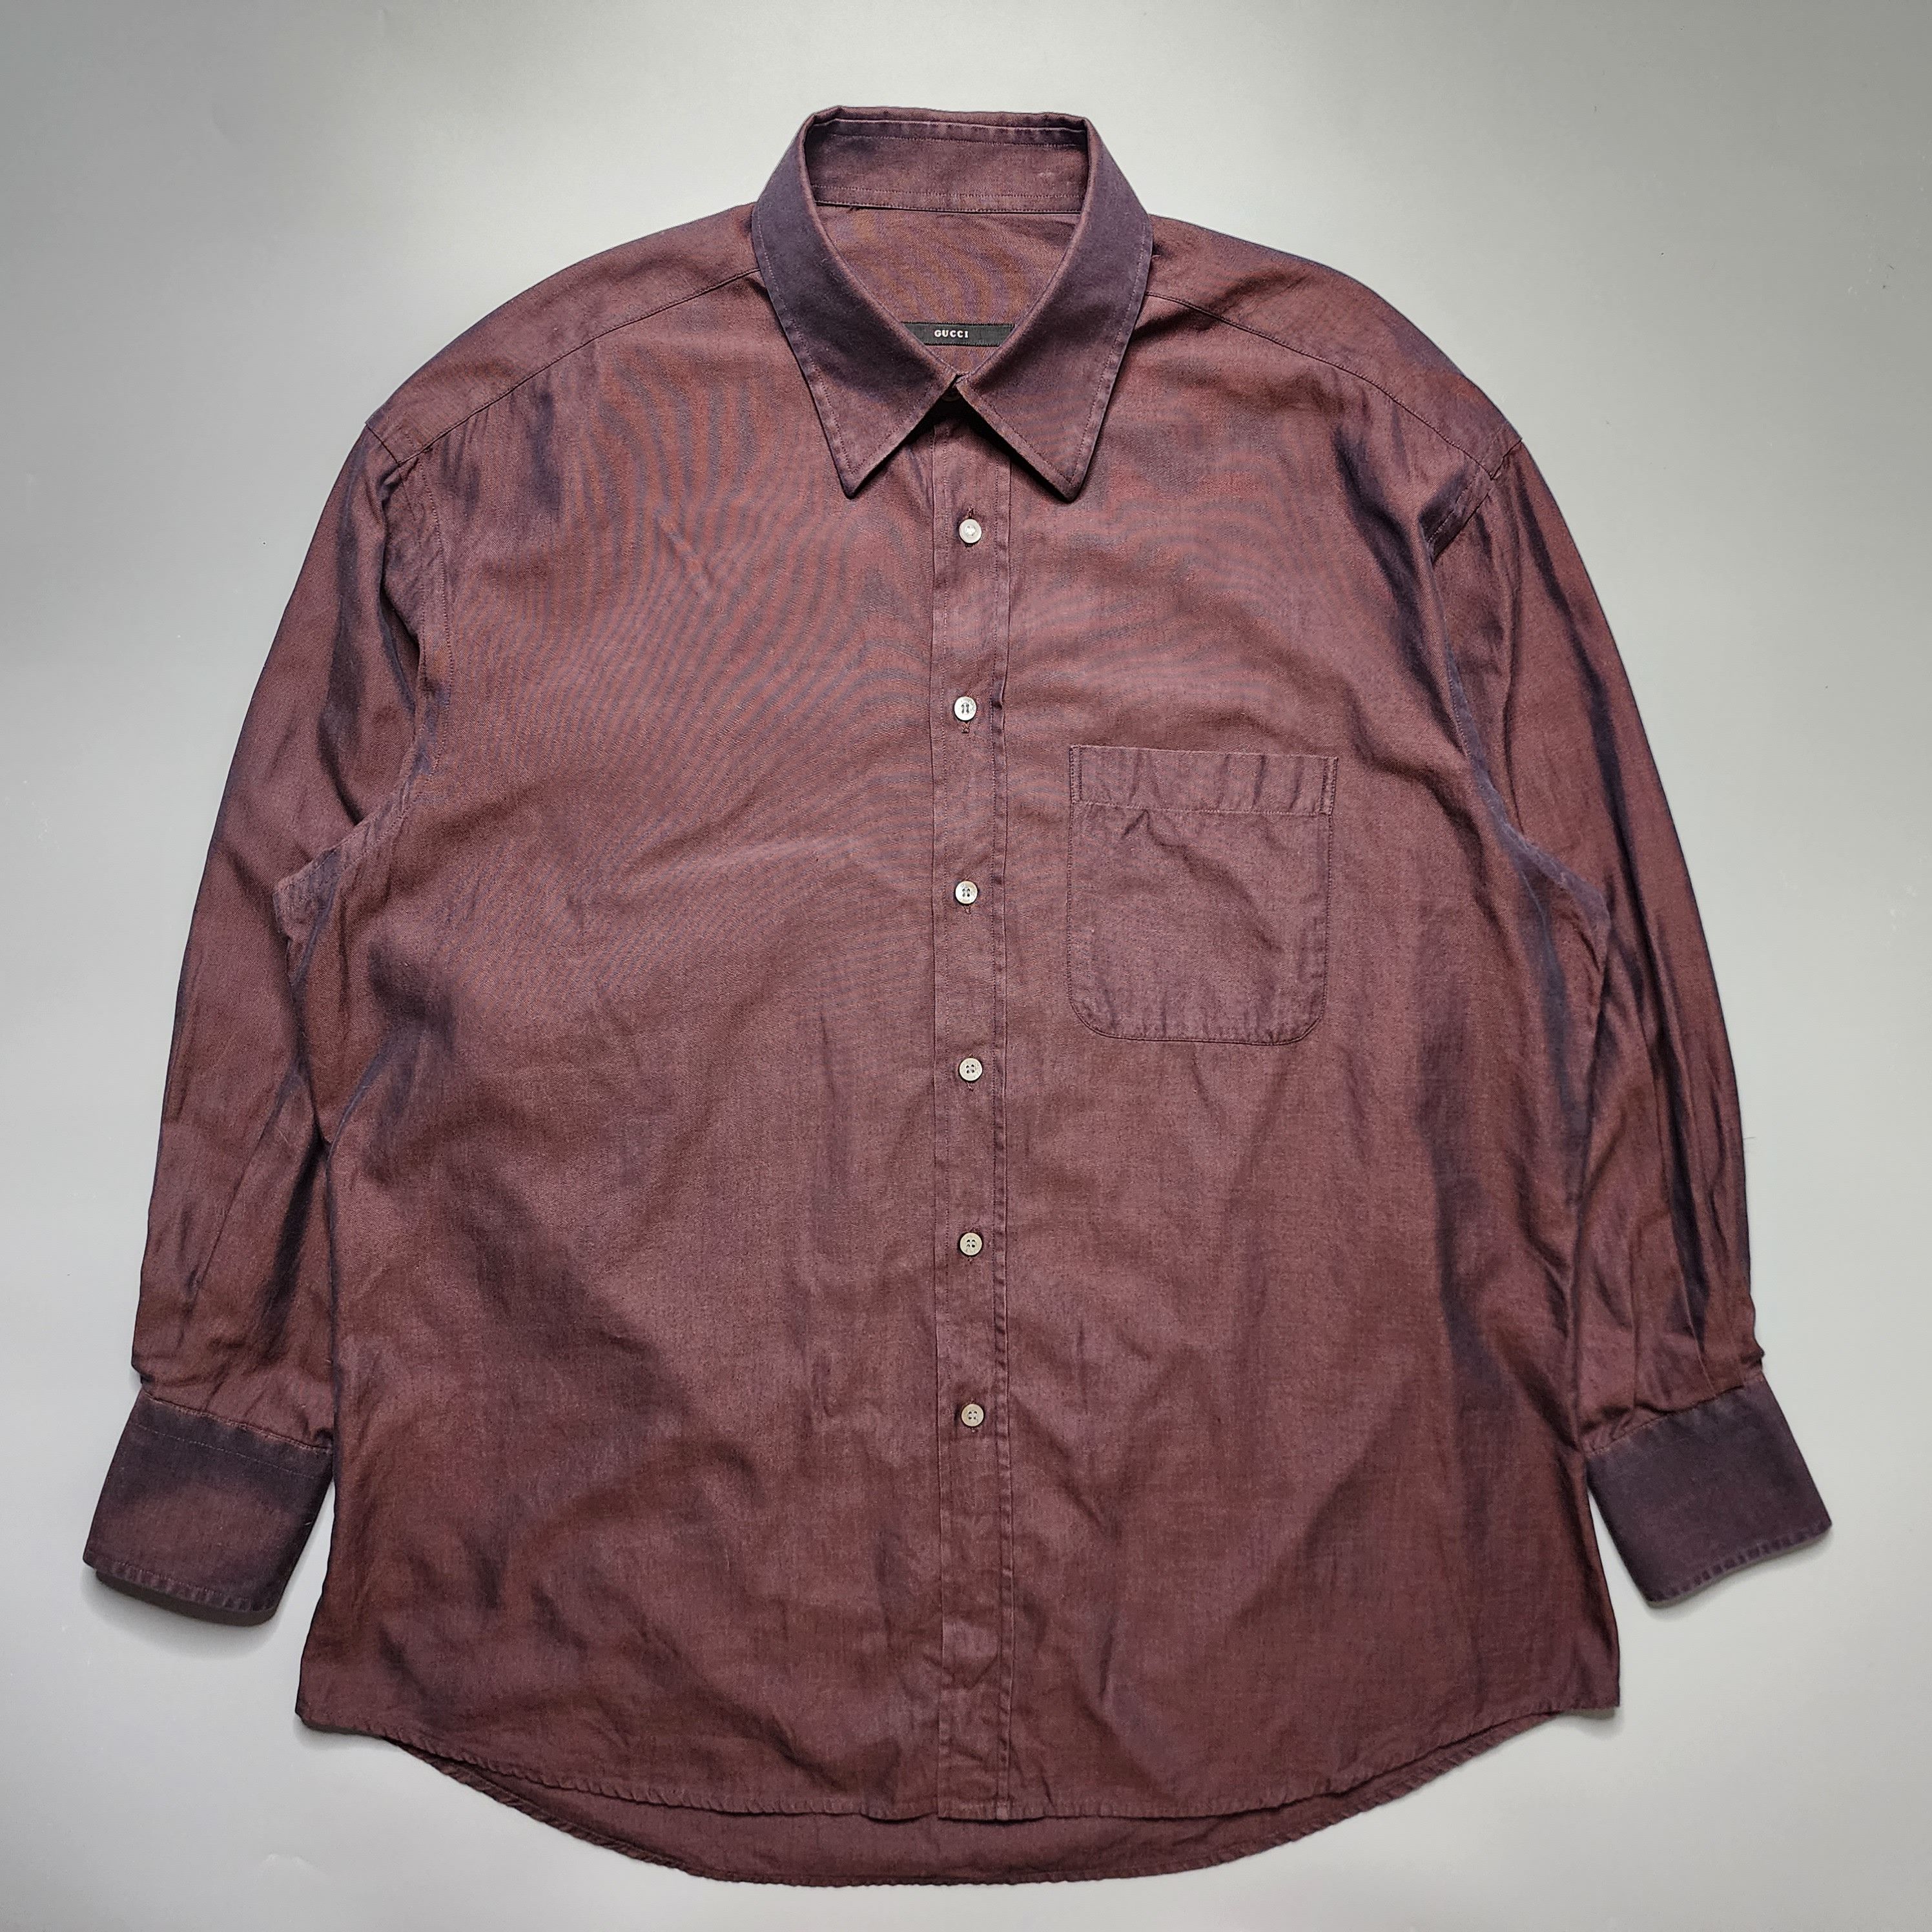 Gucci by Tom Ford - Iridescent Shirt - Cotton - 2